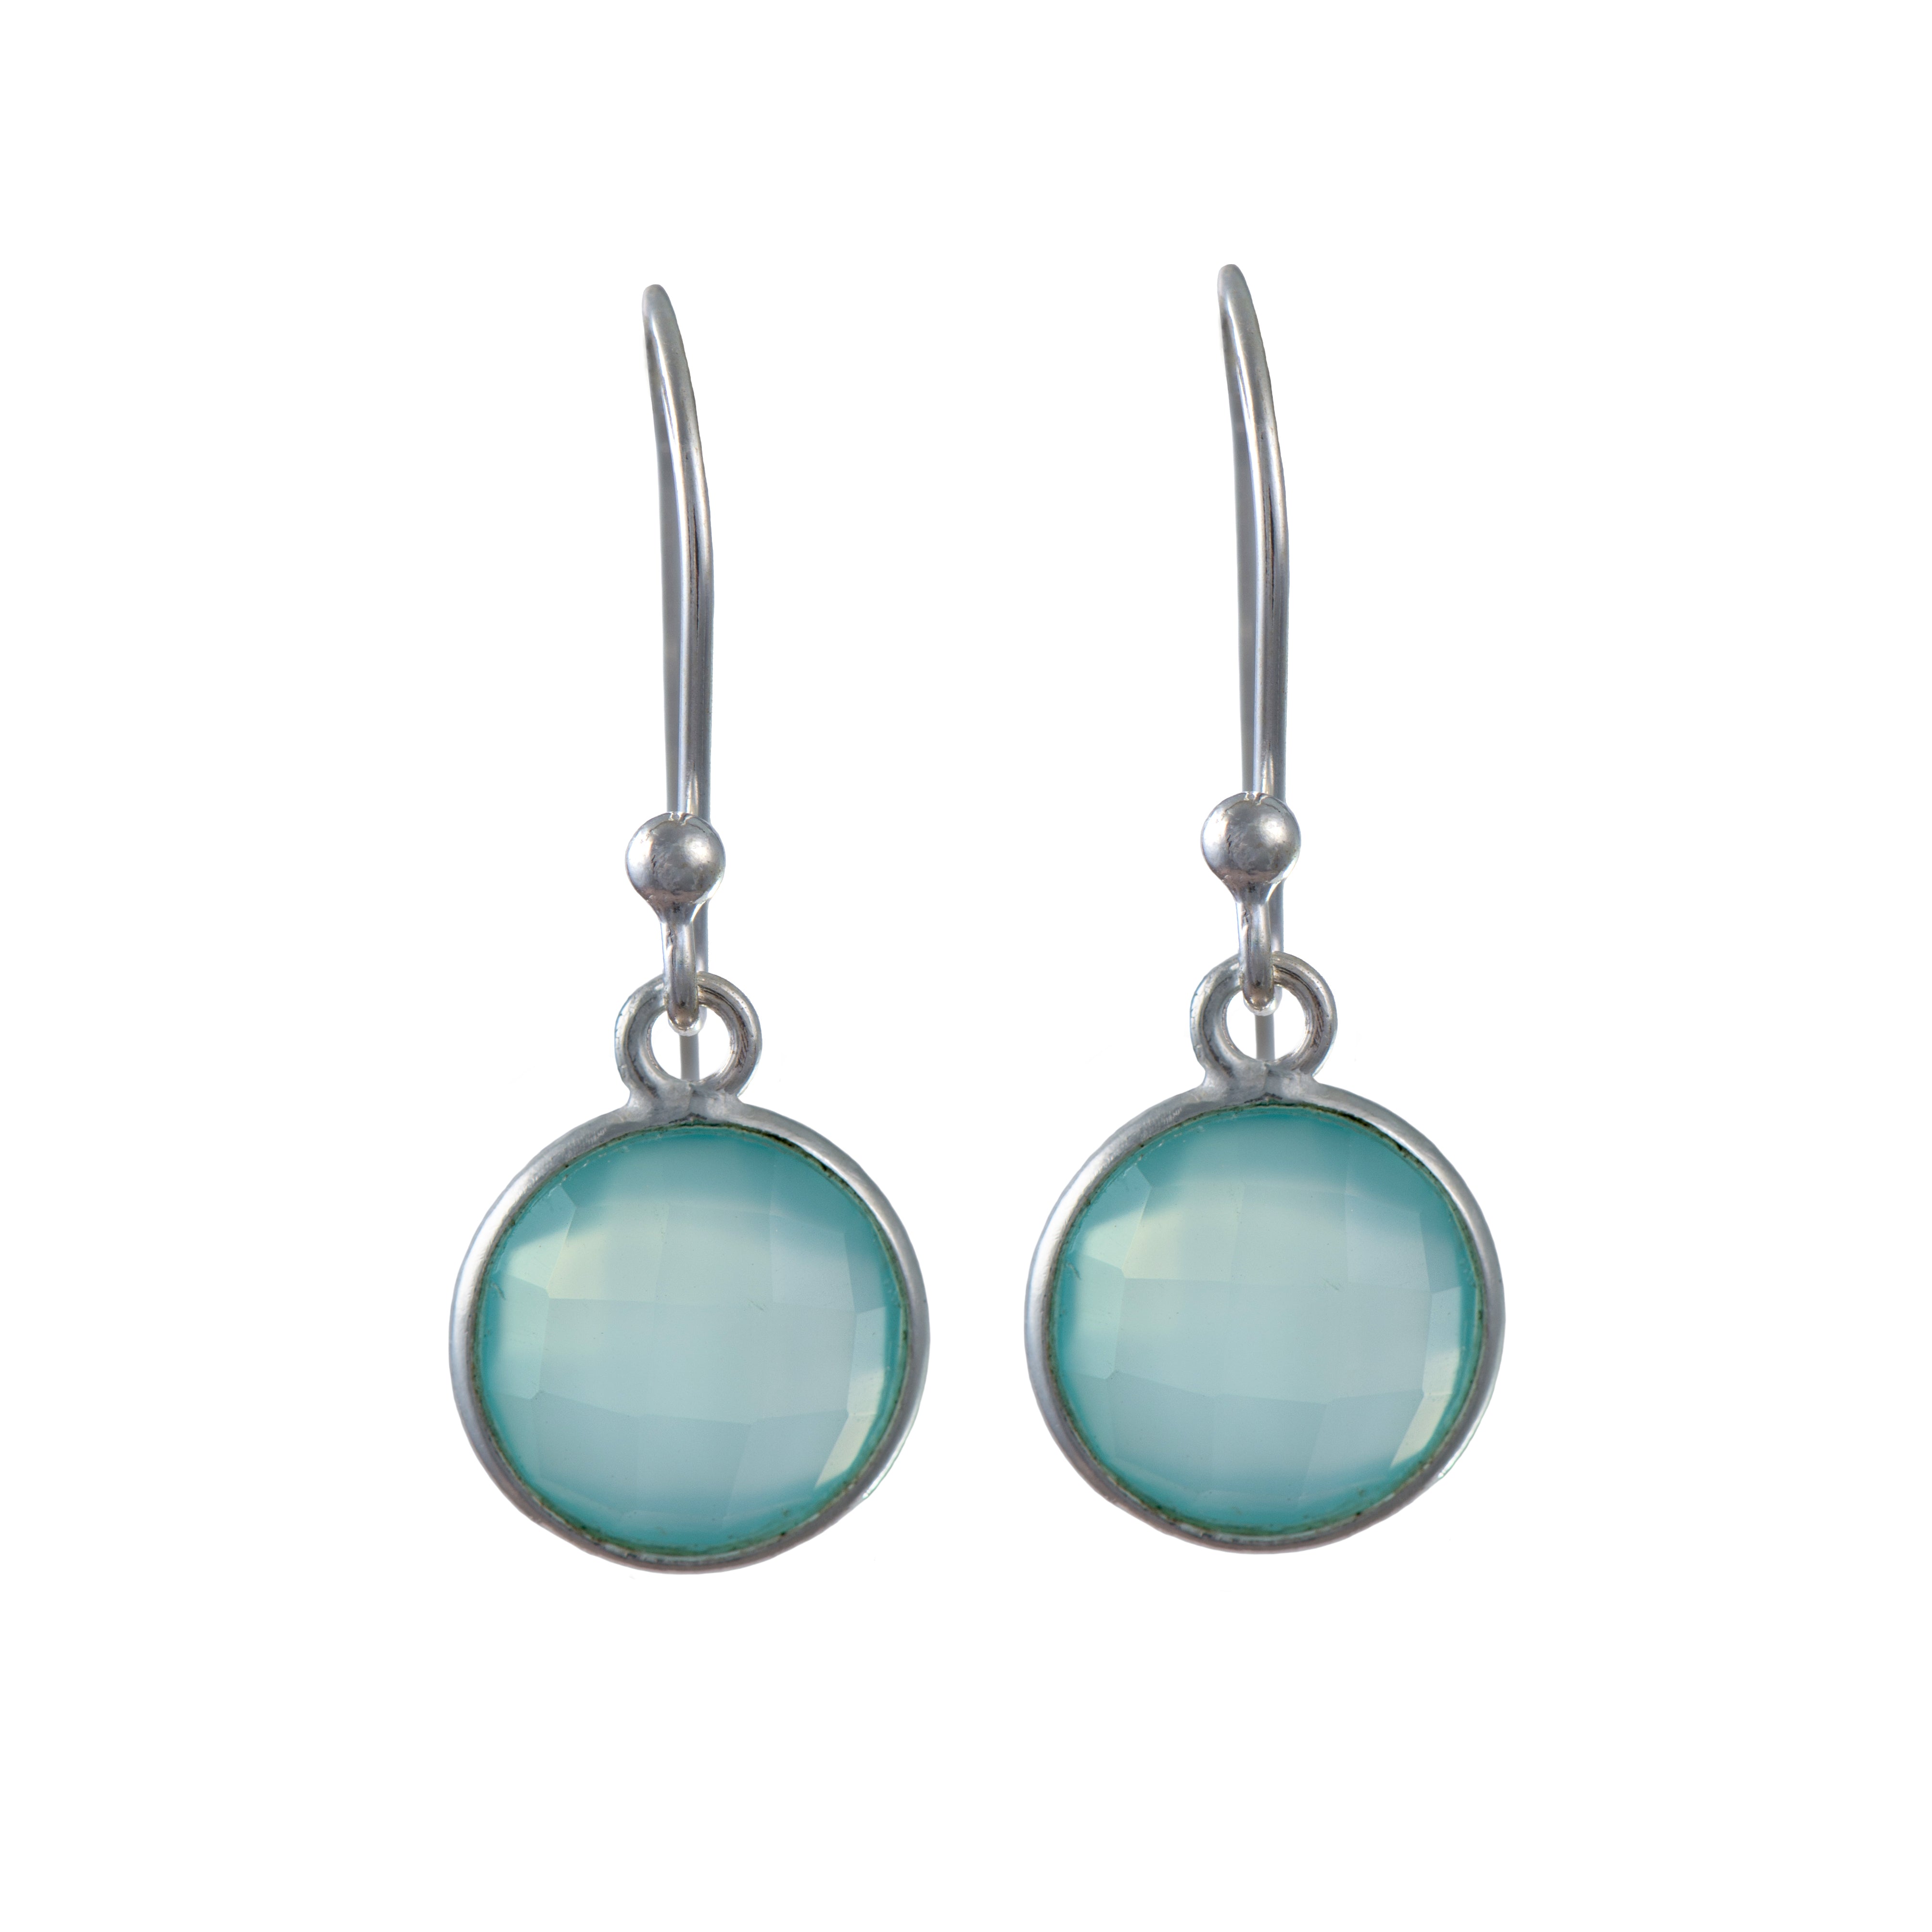 Aqua Chalcedony Sterling Silver Earrings with a Round Faceted Gemstone Drop